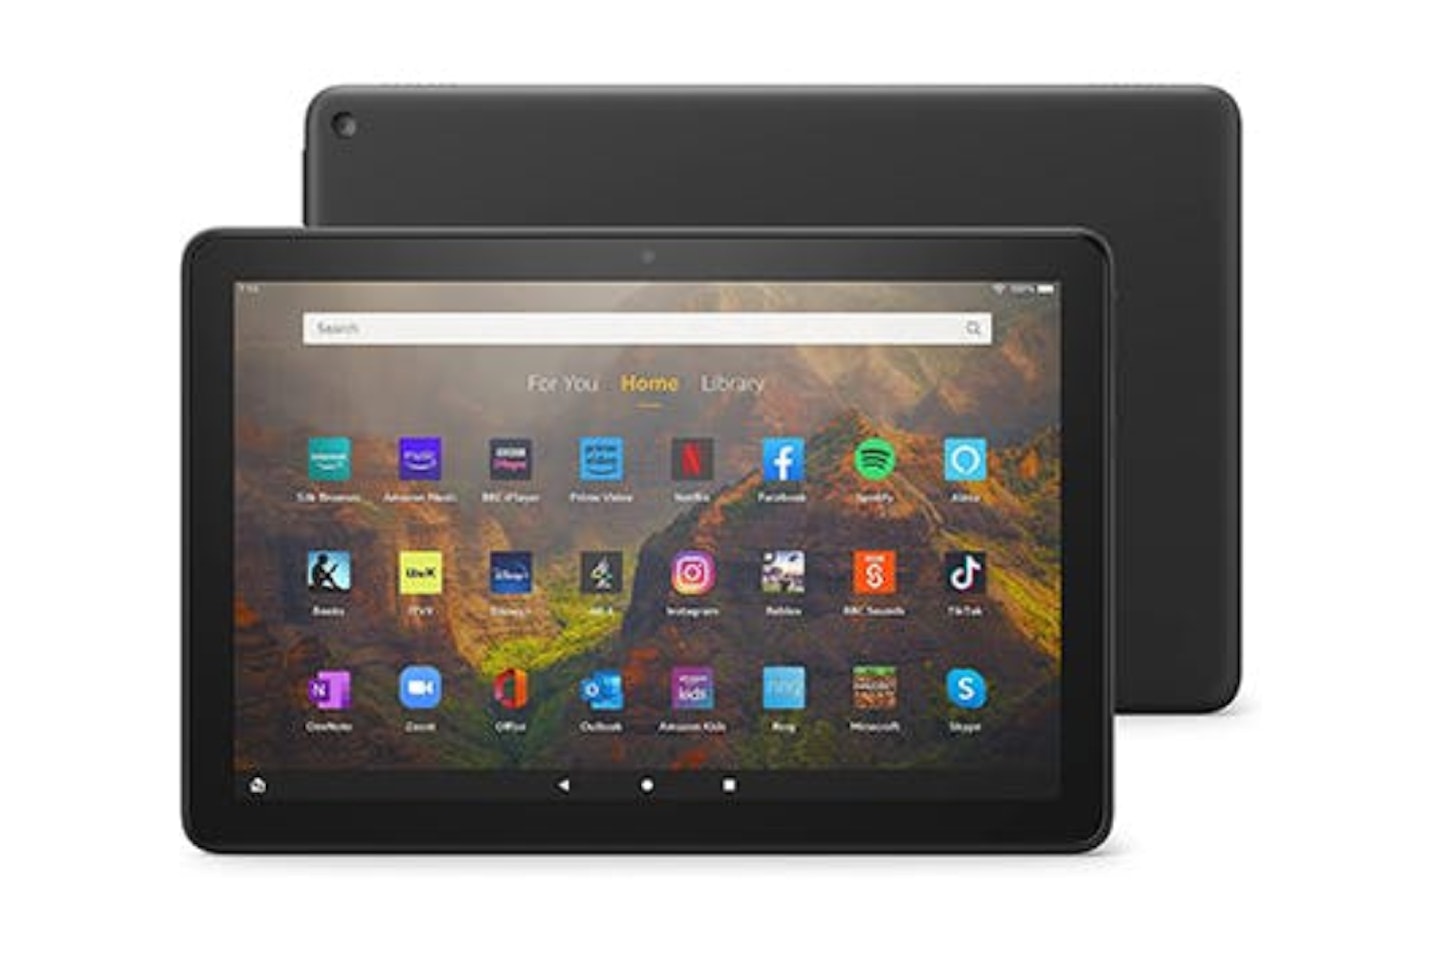 Fire HD 10 tablet - one of the best Android tablets